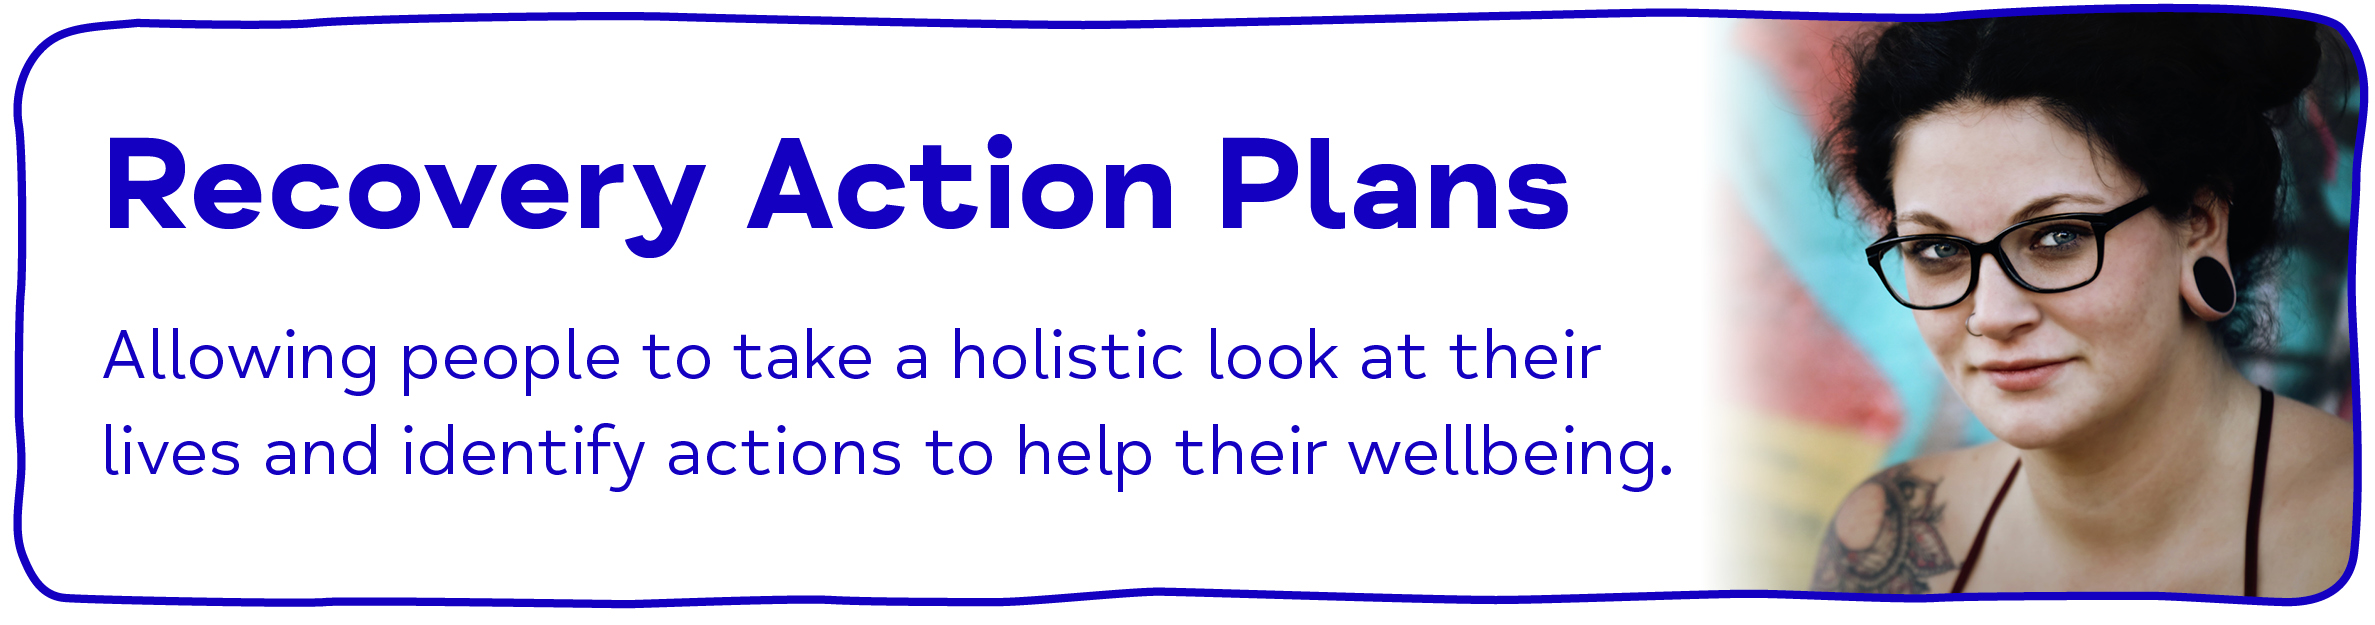 Recovery Action Plans - Allowing people to take a holistic look at their lives and identify actions to help their wellbeing.